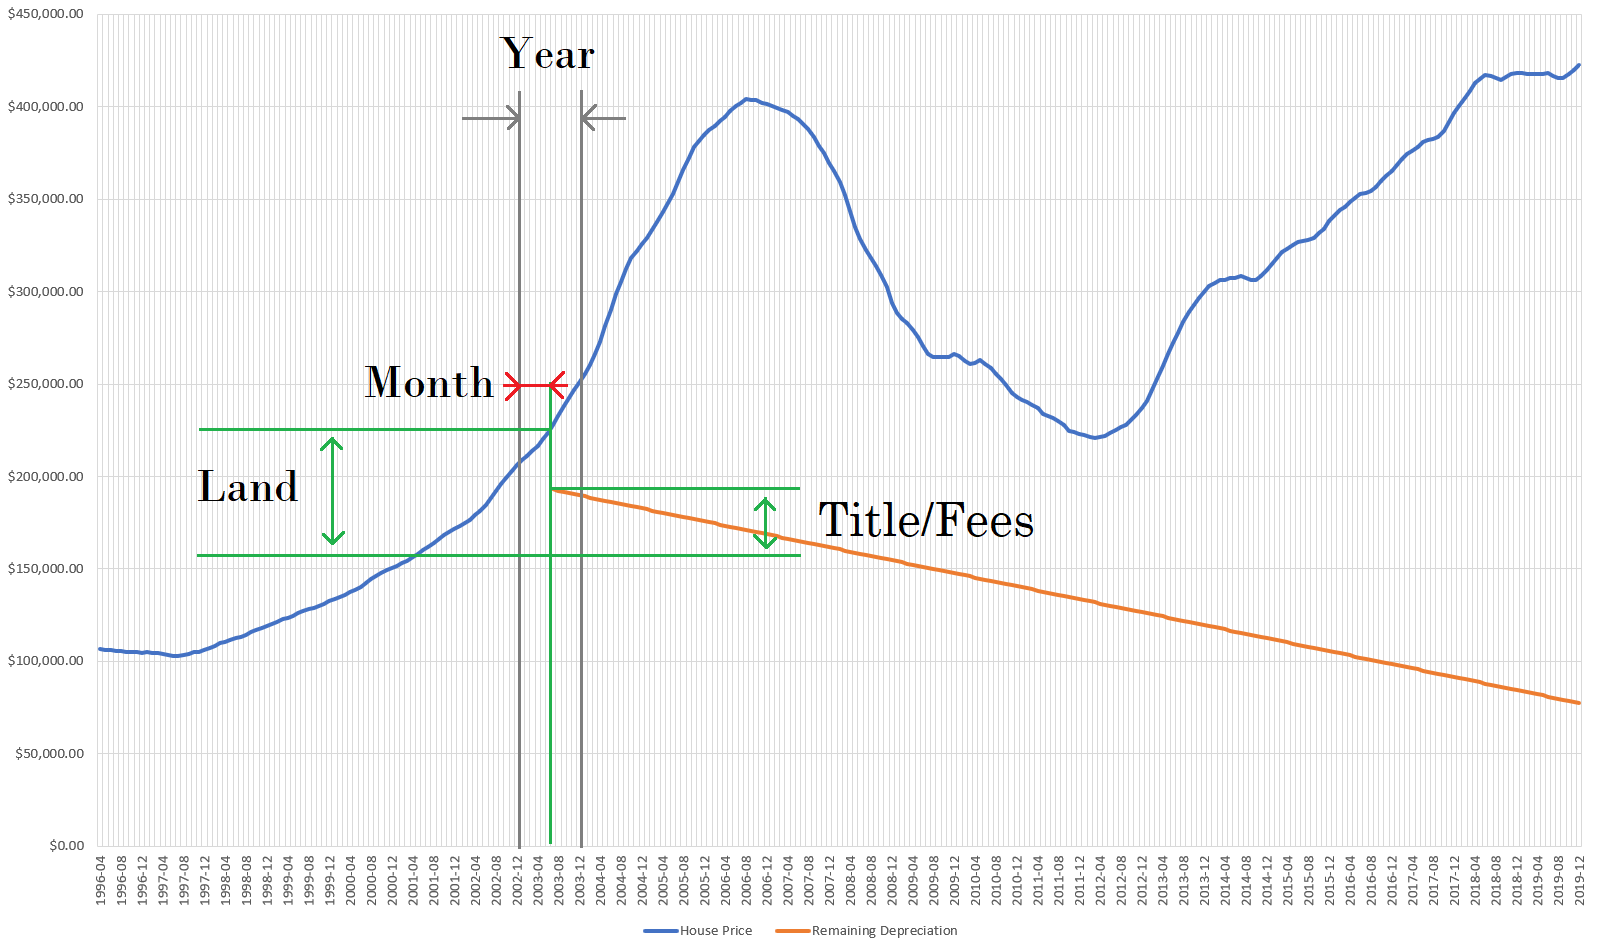 Theoretical house price value over time